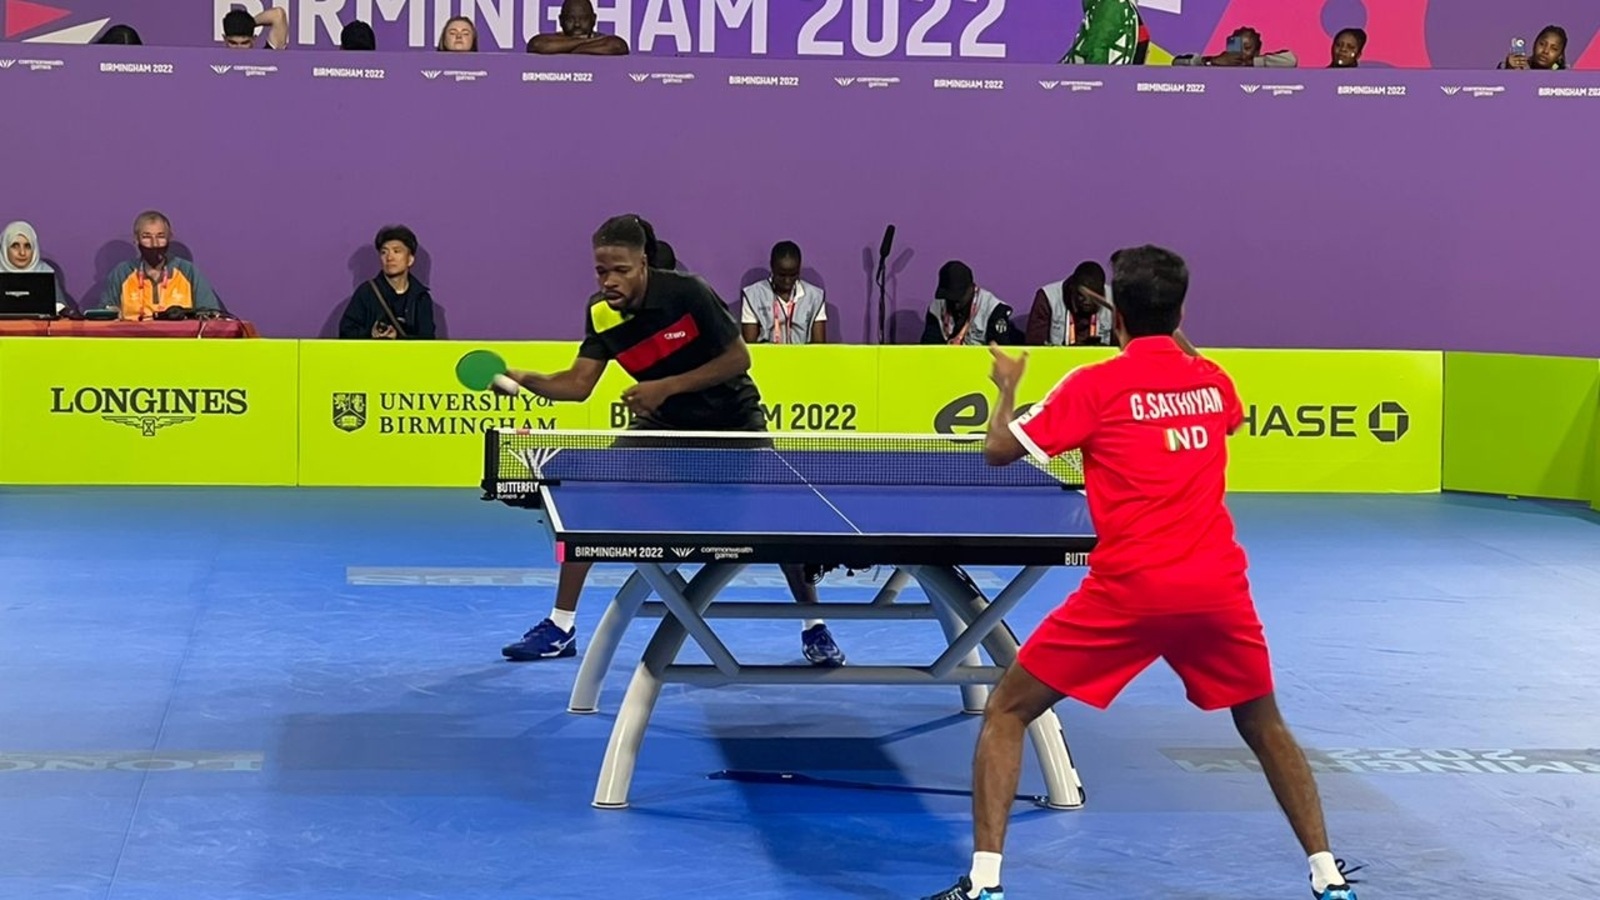 Watch Sathiyans clinical finish that put India mens TT team into CWG finals